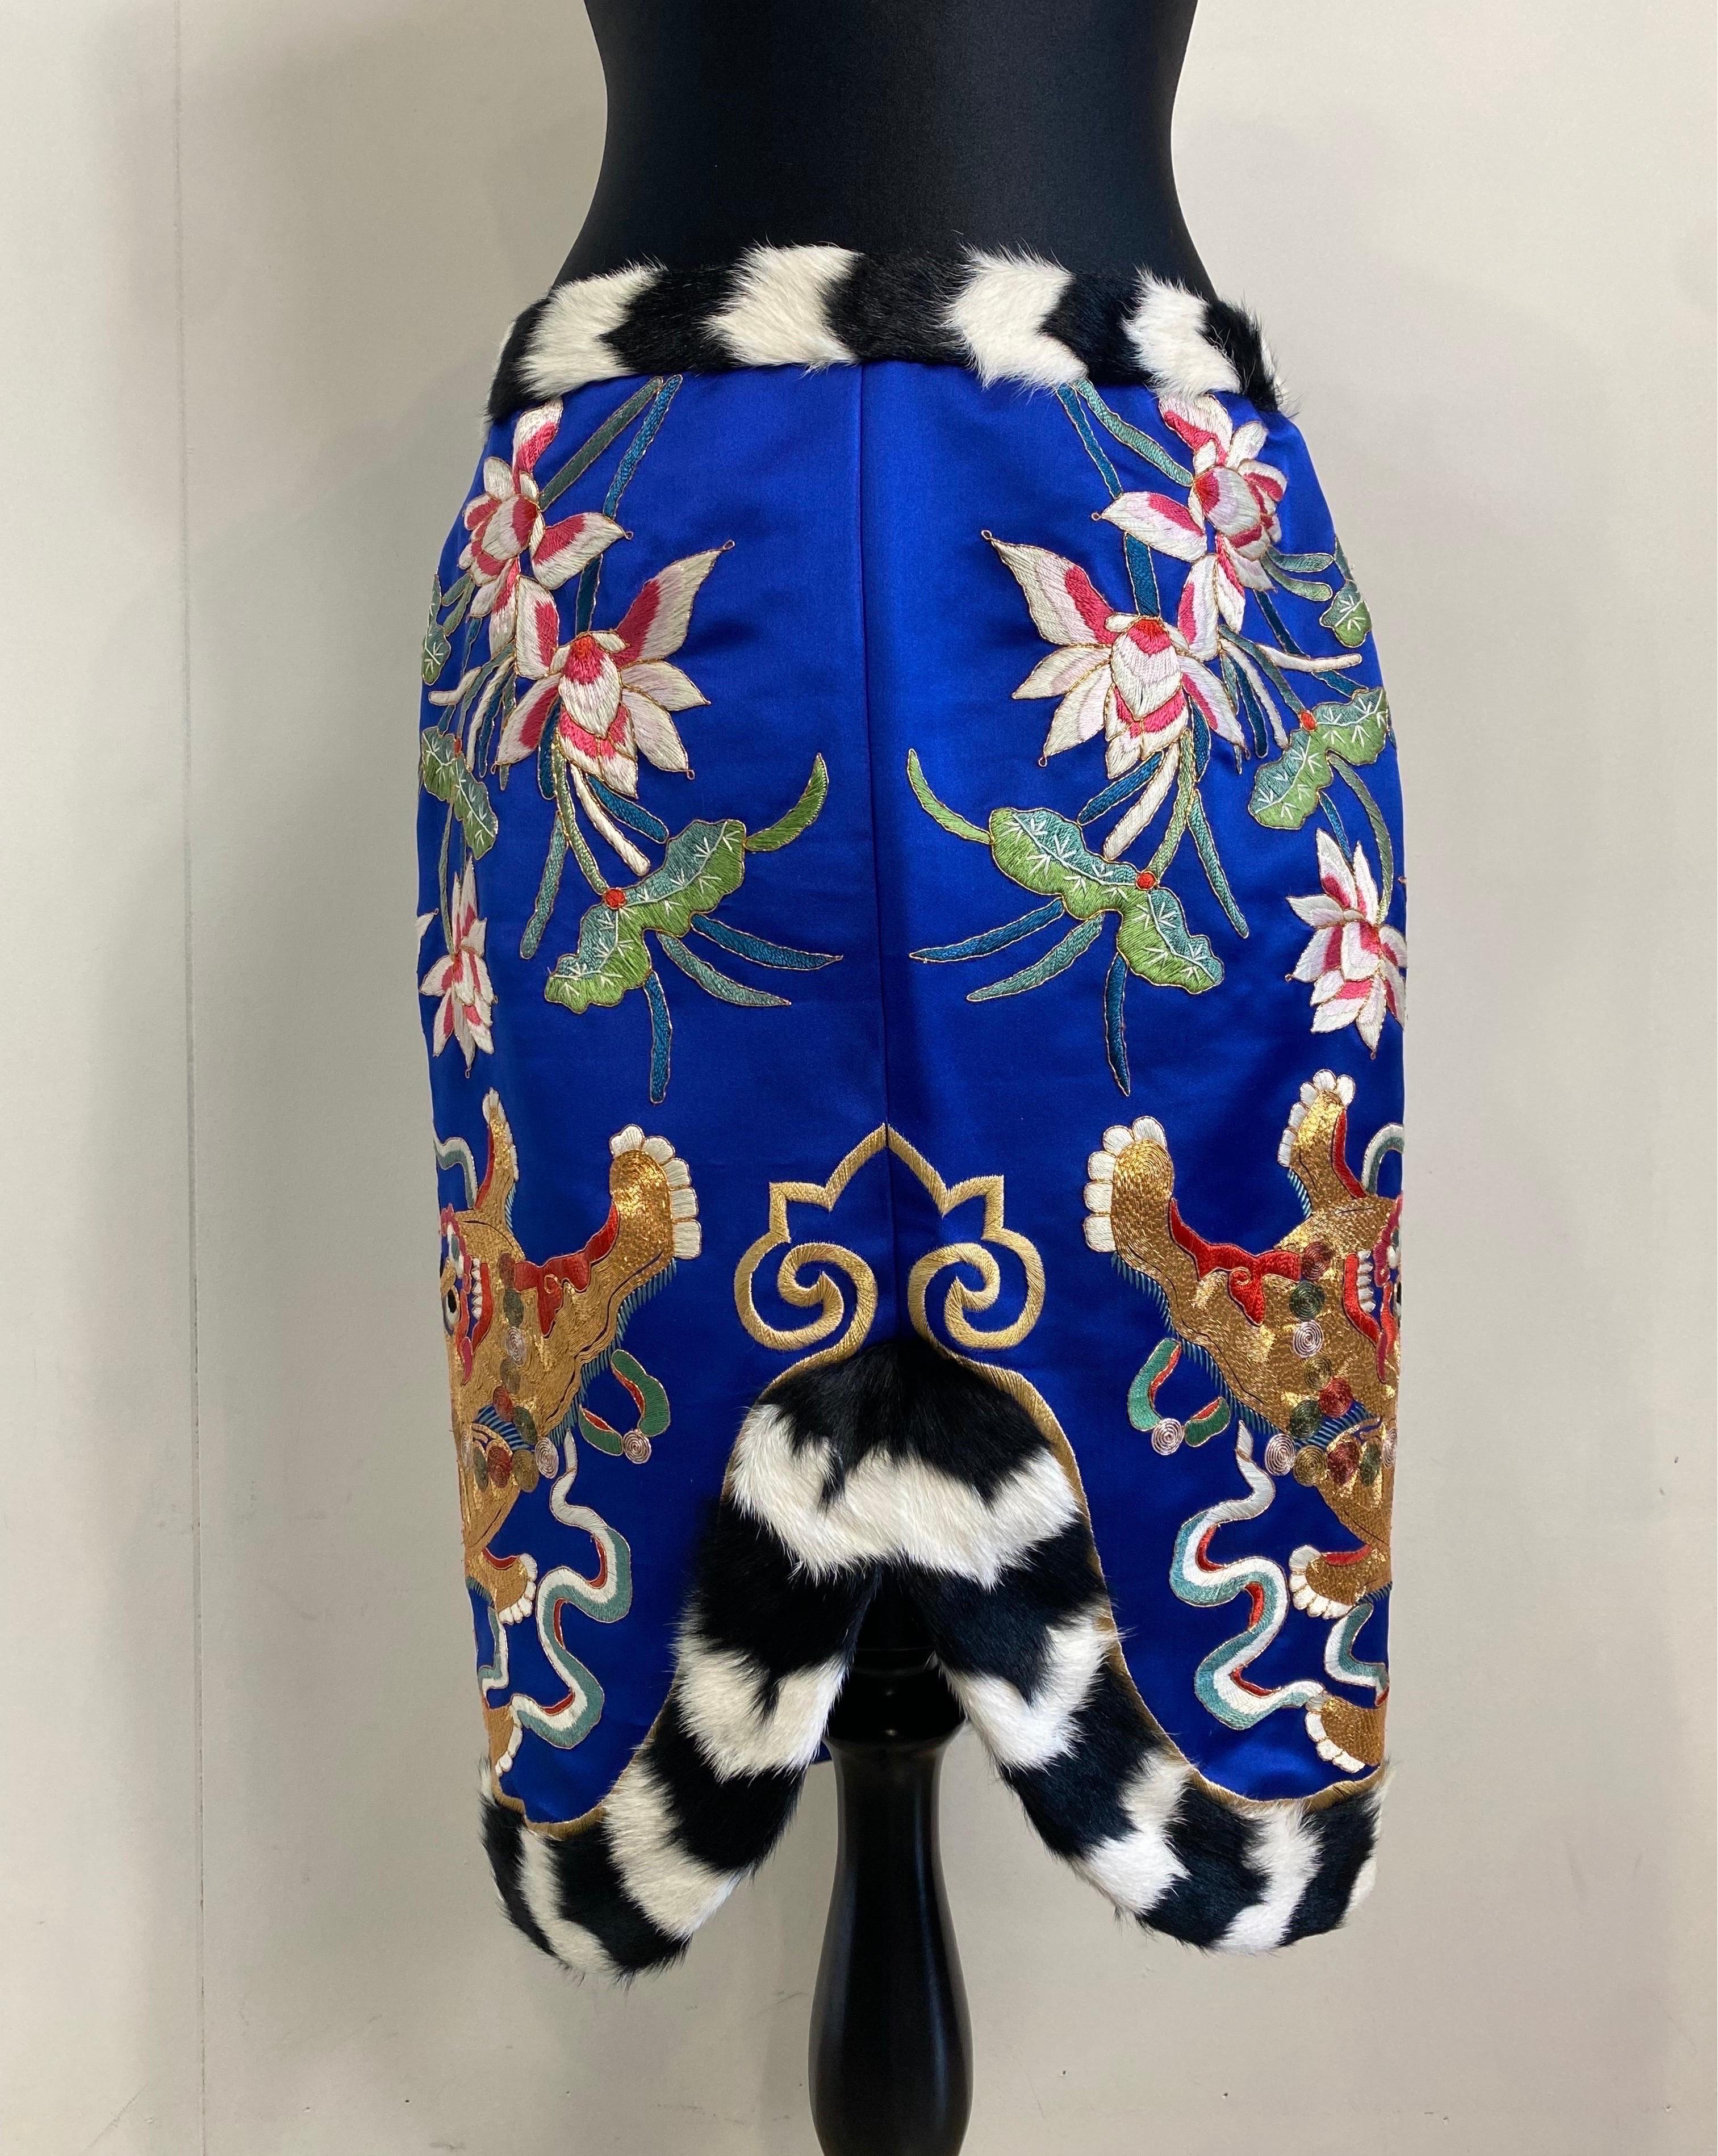 Tom Ford pencil skirt.
In silk, lined. Fur detail.
Beautiful embroidery inspired by the oriental world.
Back zip closure.
Italian size 44.
Waist 40cm
Hips 47 cm
Length 60 cm
Excellent general conditions.